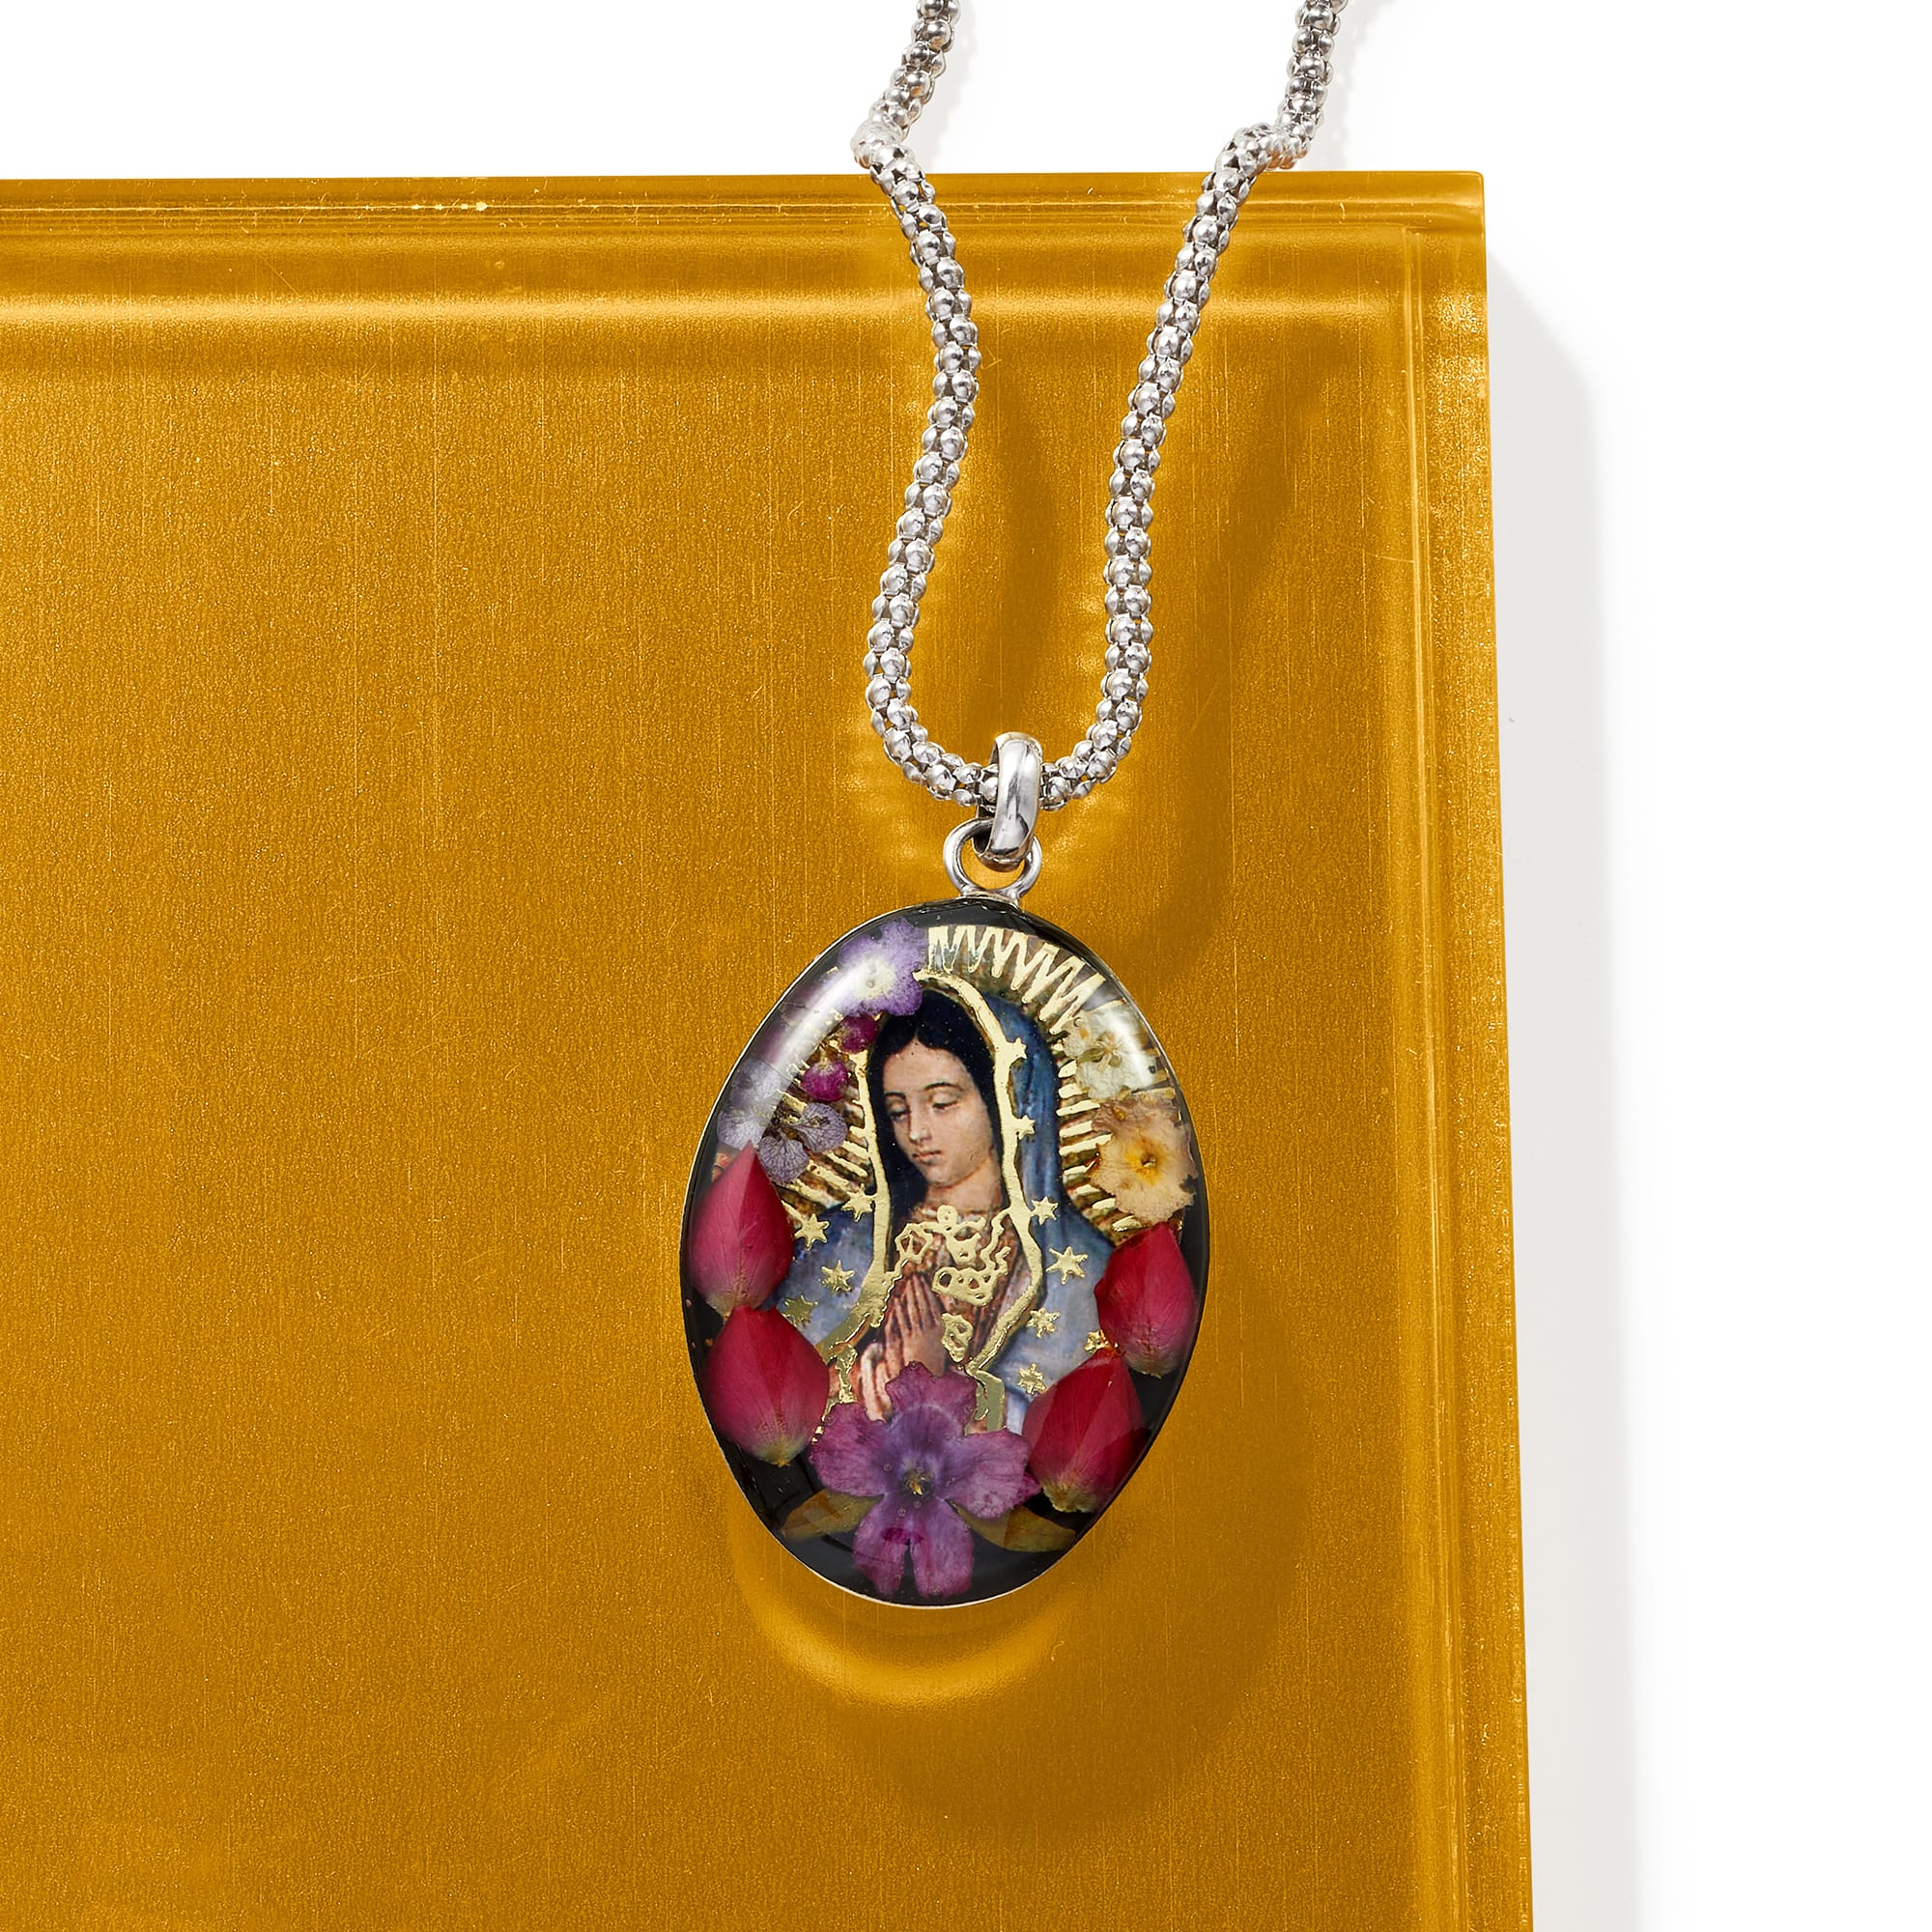 14KT Two Tone Gold Virgin Mary Face Miraculous Medal Our Lady Of Guadalupe  Pendant Necklace Religious Charm Jewelry Gifts Filigree Design - Goldcraft  Inc